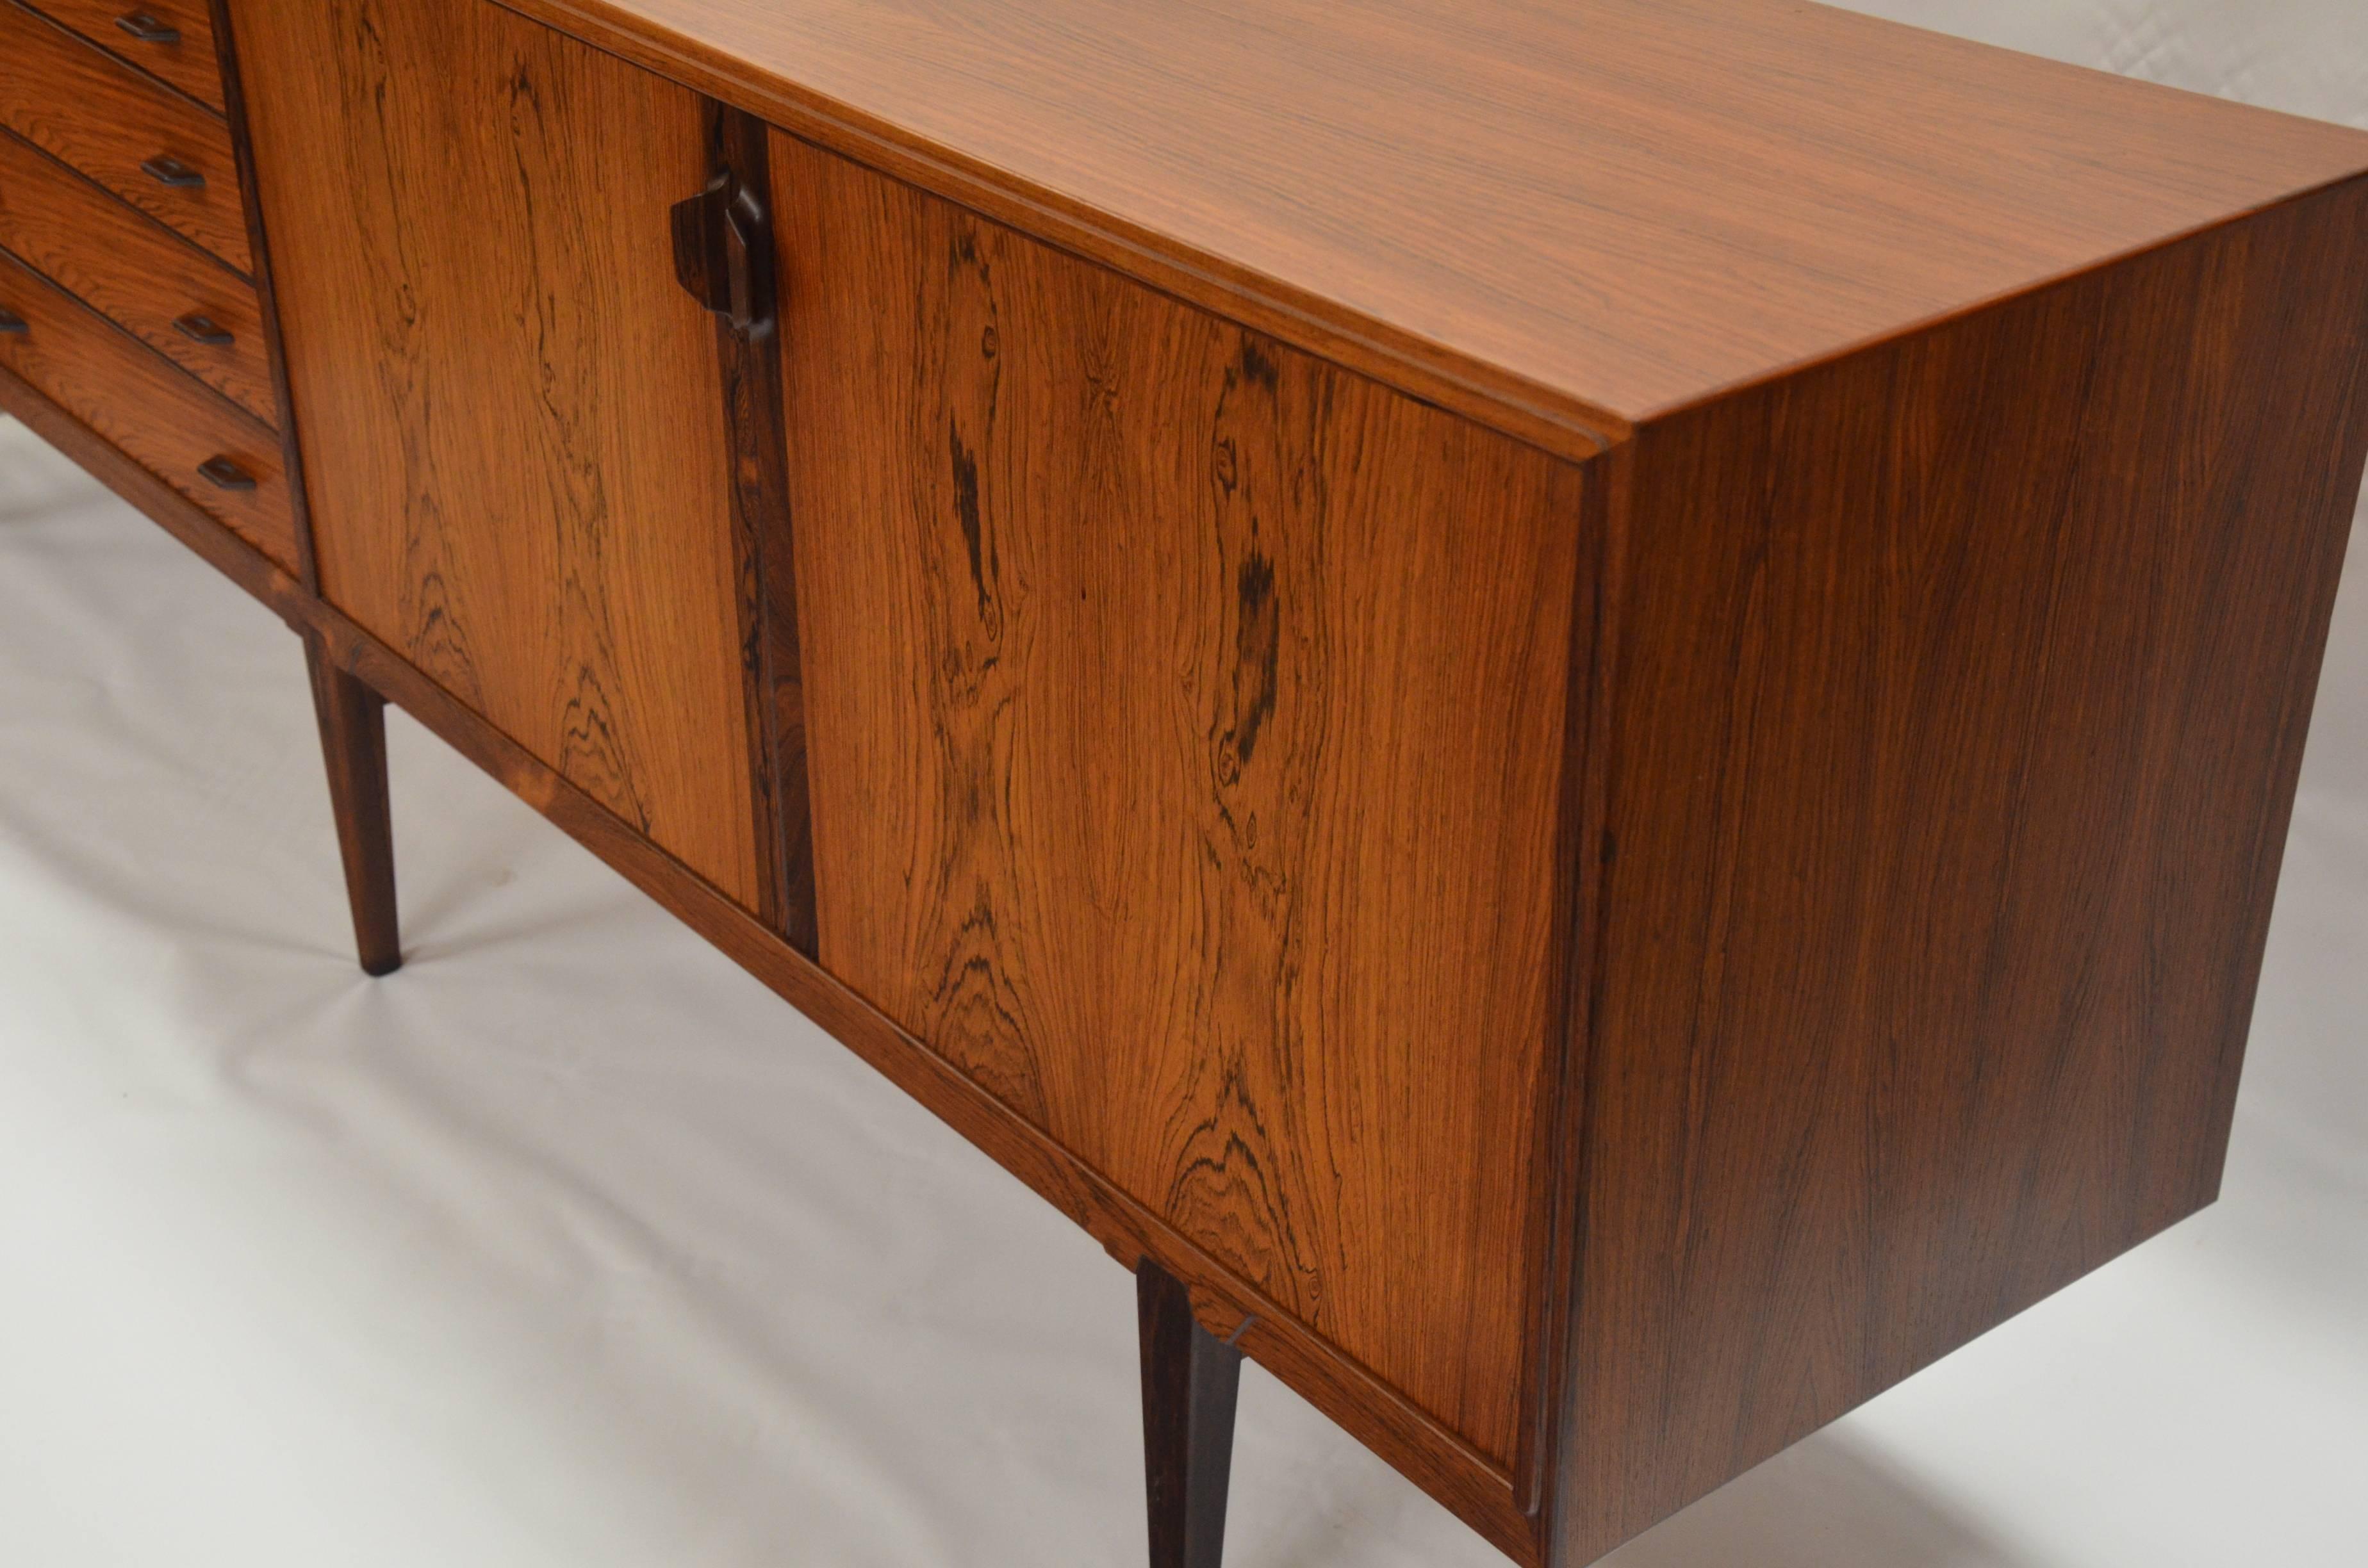 A Mid-Century Danish Modern rosewood credenza designed by Henry Rosengren Hansen for Brande Møbelindustrie. Measuring over 7 feet long, this cabinet is a beautiful, high quality example of Scandinavian design. Sculpted out of rosewood, it is